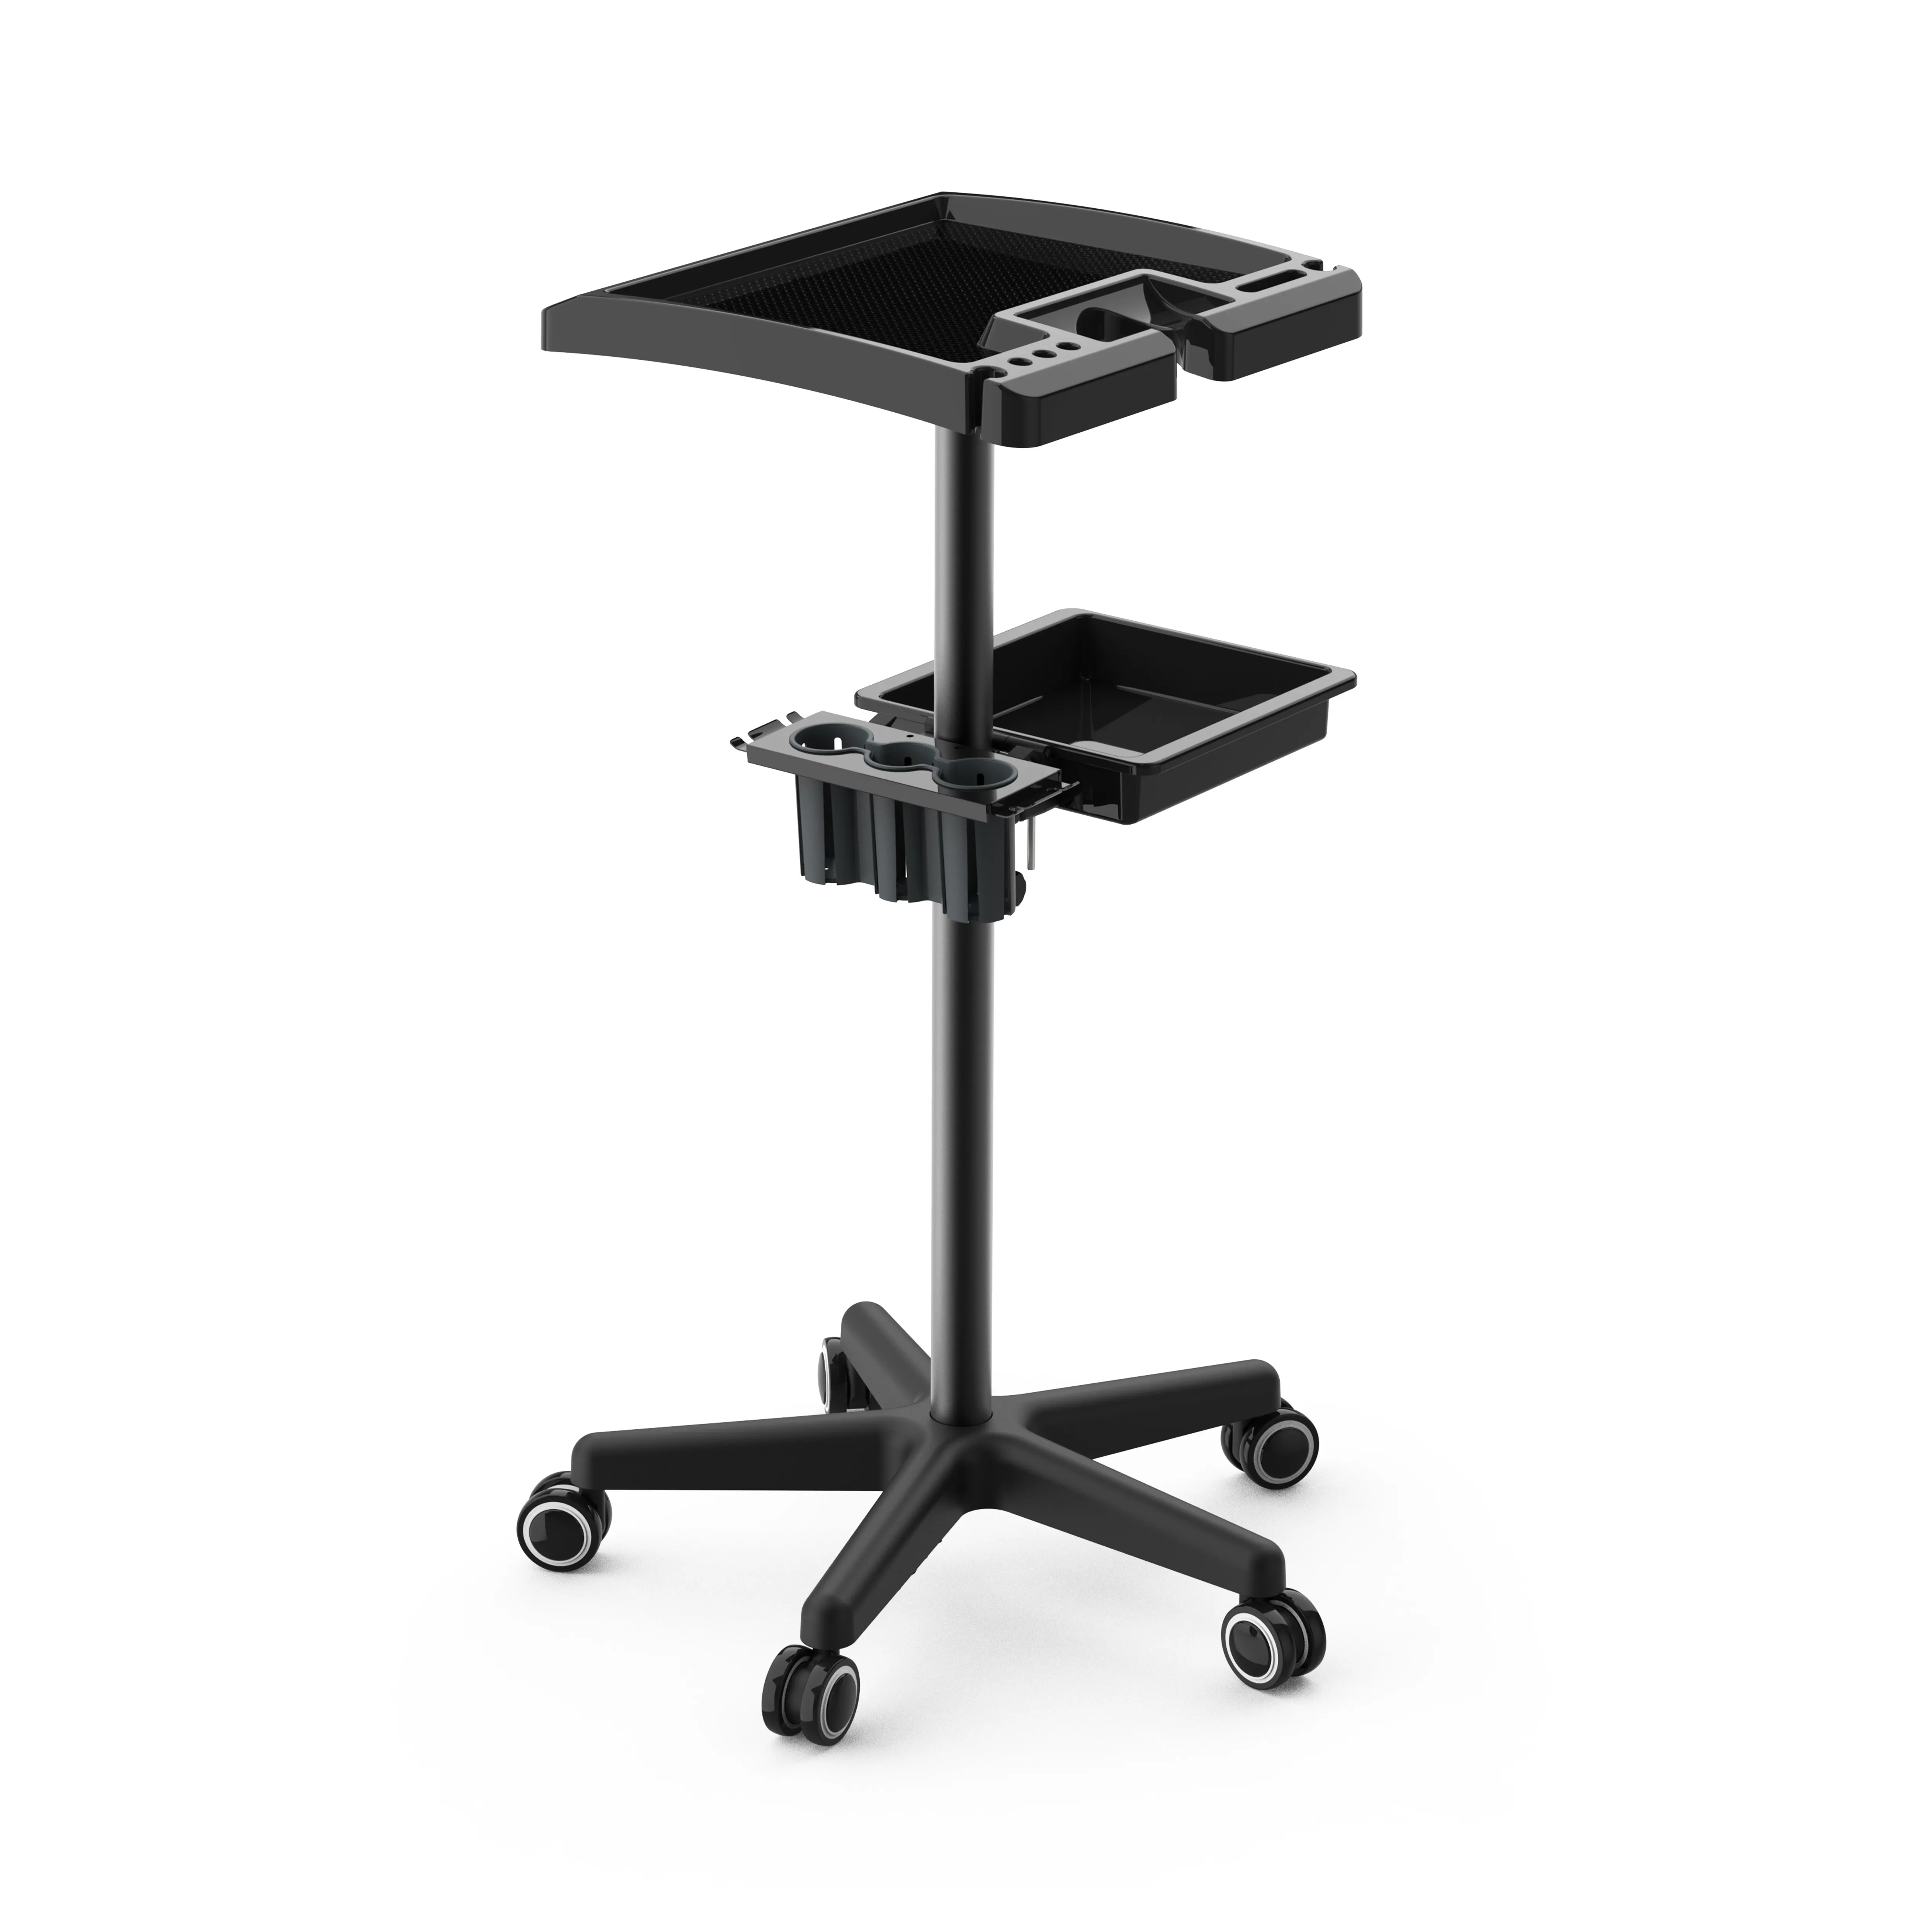 Professional Fashion Hairdressing Equipment 2-in-1 Dryer Holder Salon Service Tray With Folding Tray And Appliance Holders